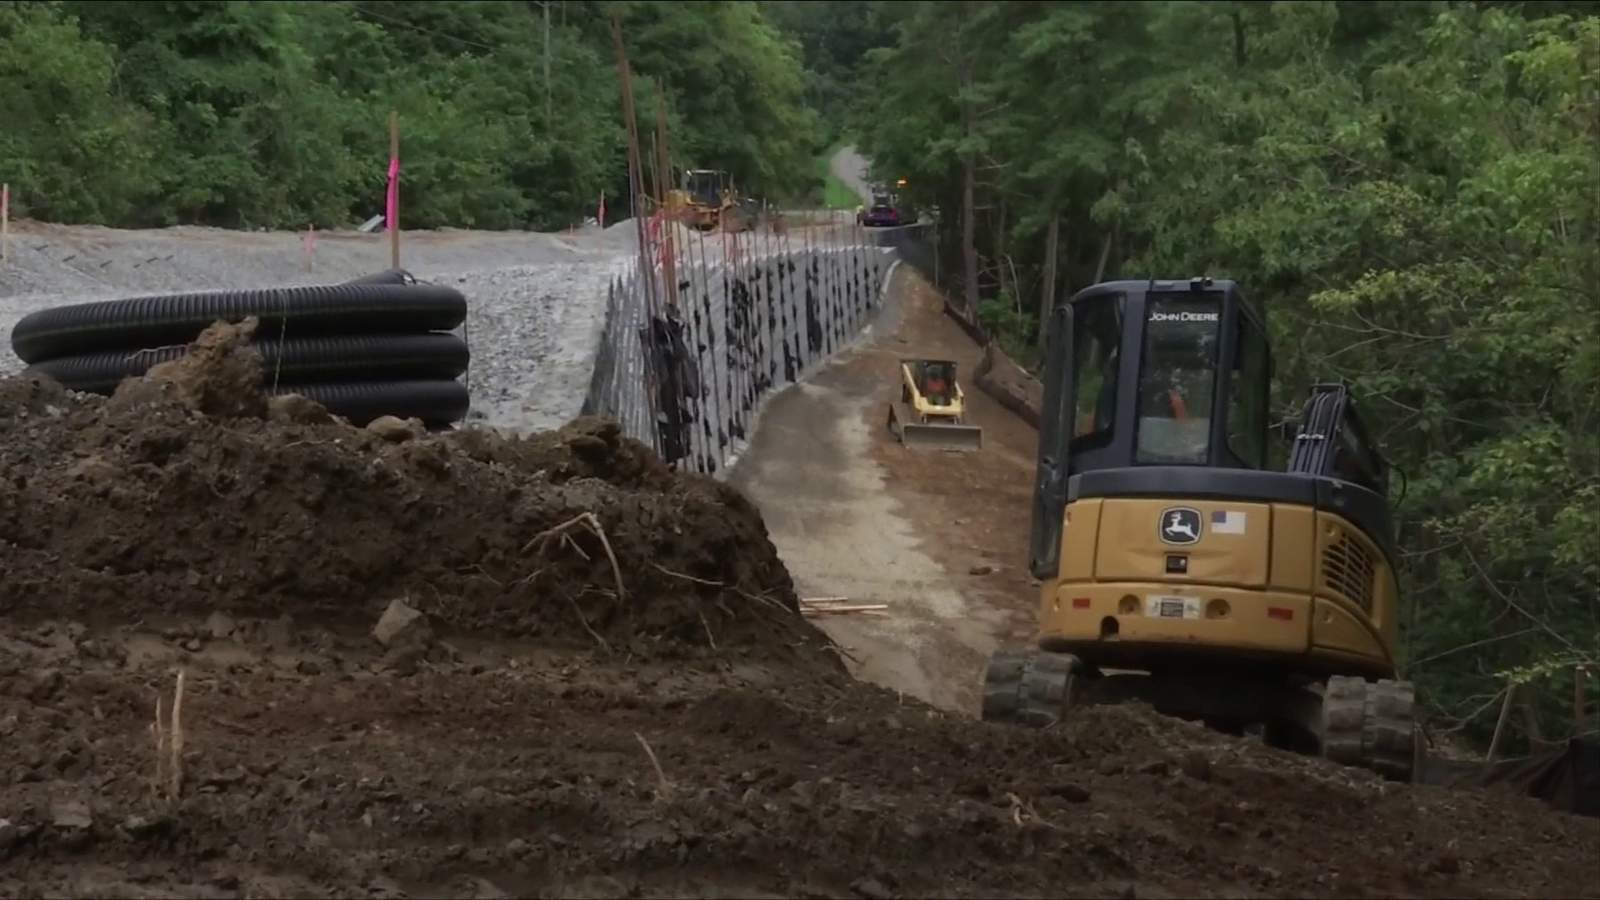 It is a massive job: Route 116 reconstruction will likely finish by Labor Day